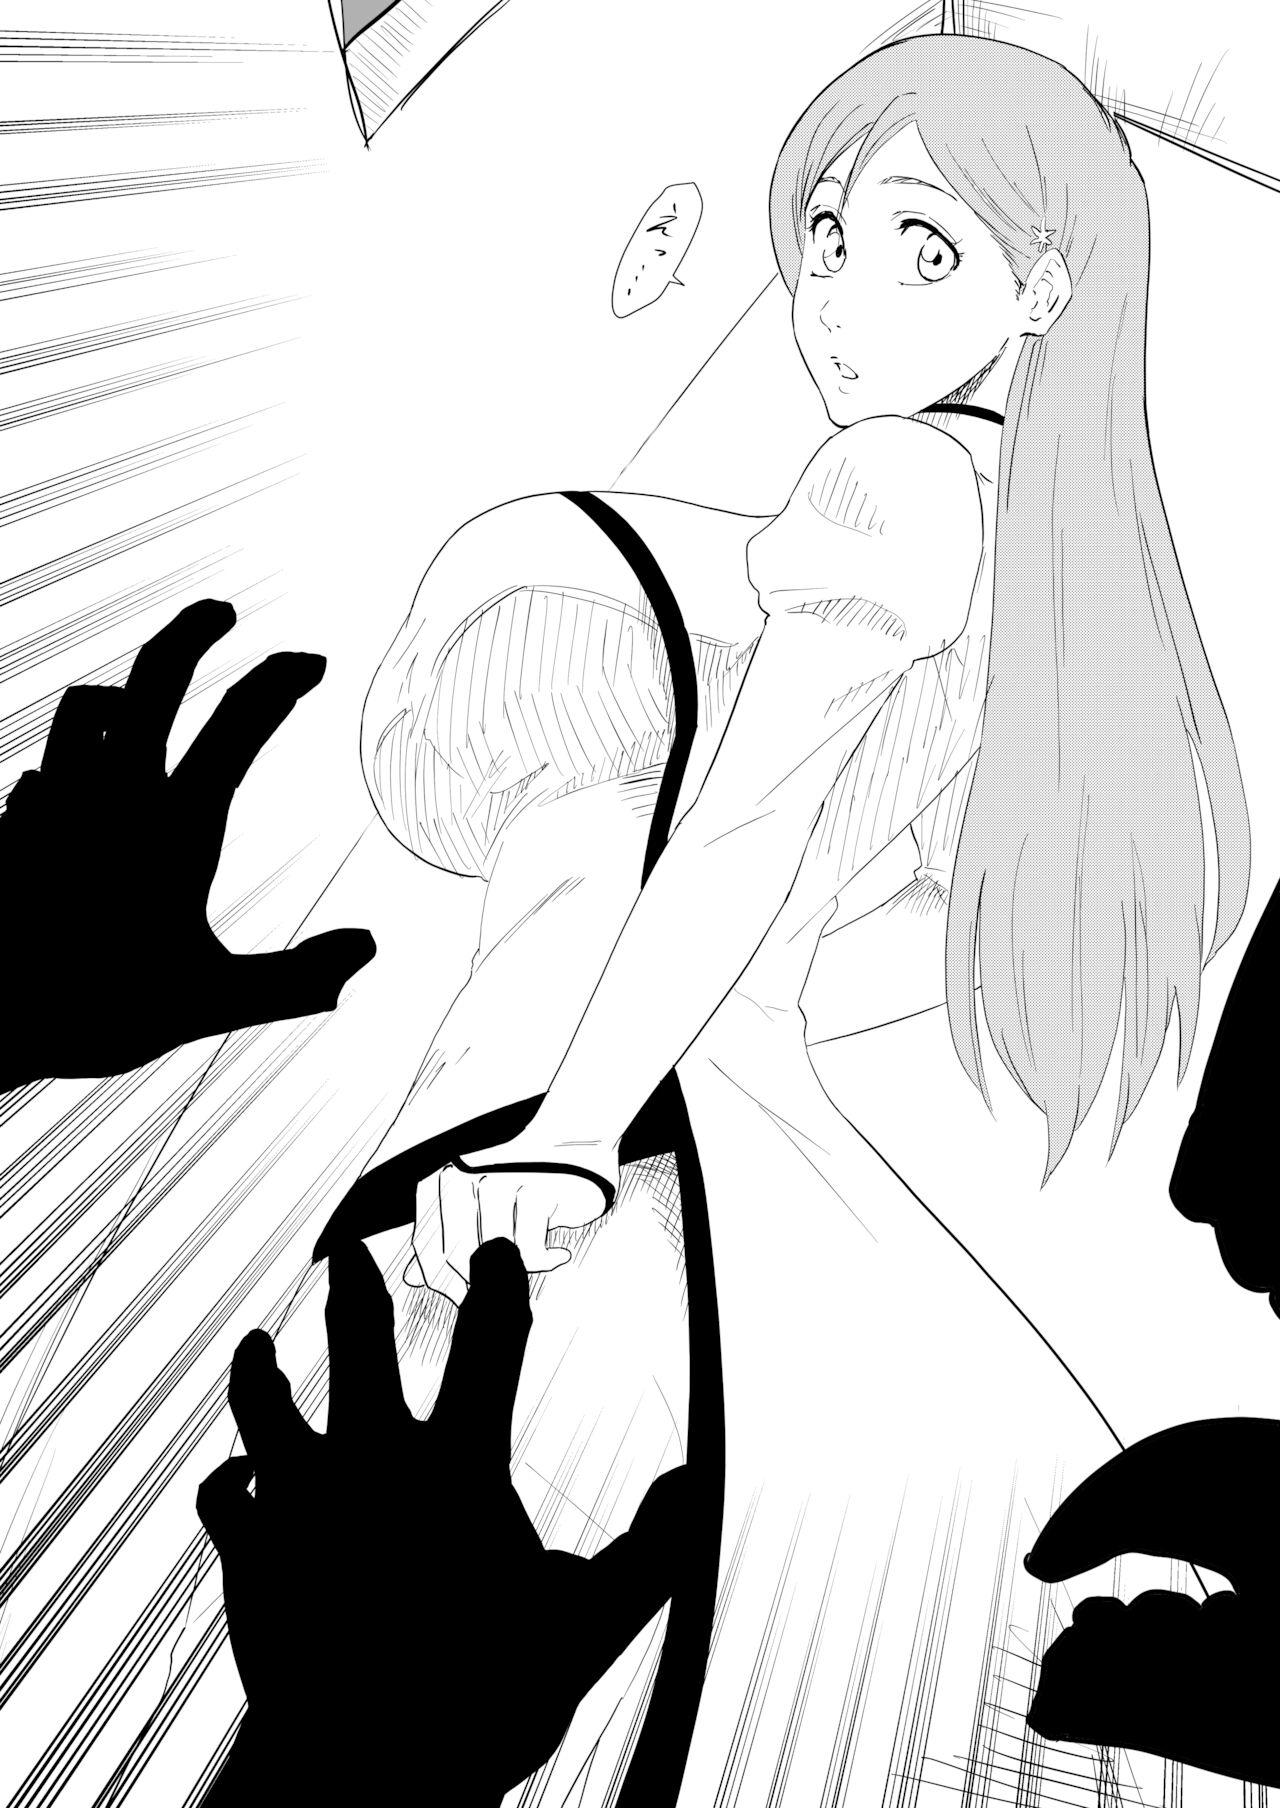 Clothed Orihime is attacked by goblin-like hollows - Bleach Art - Page 3